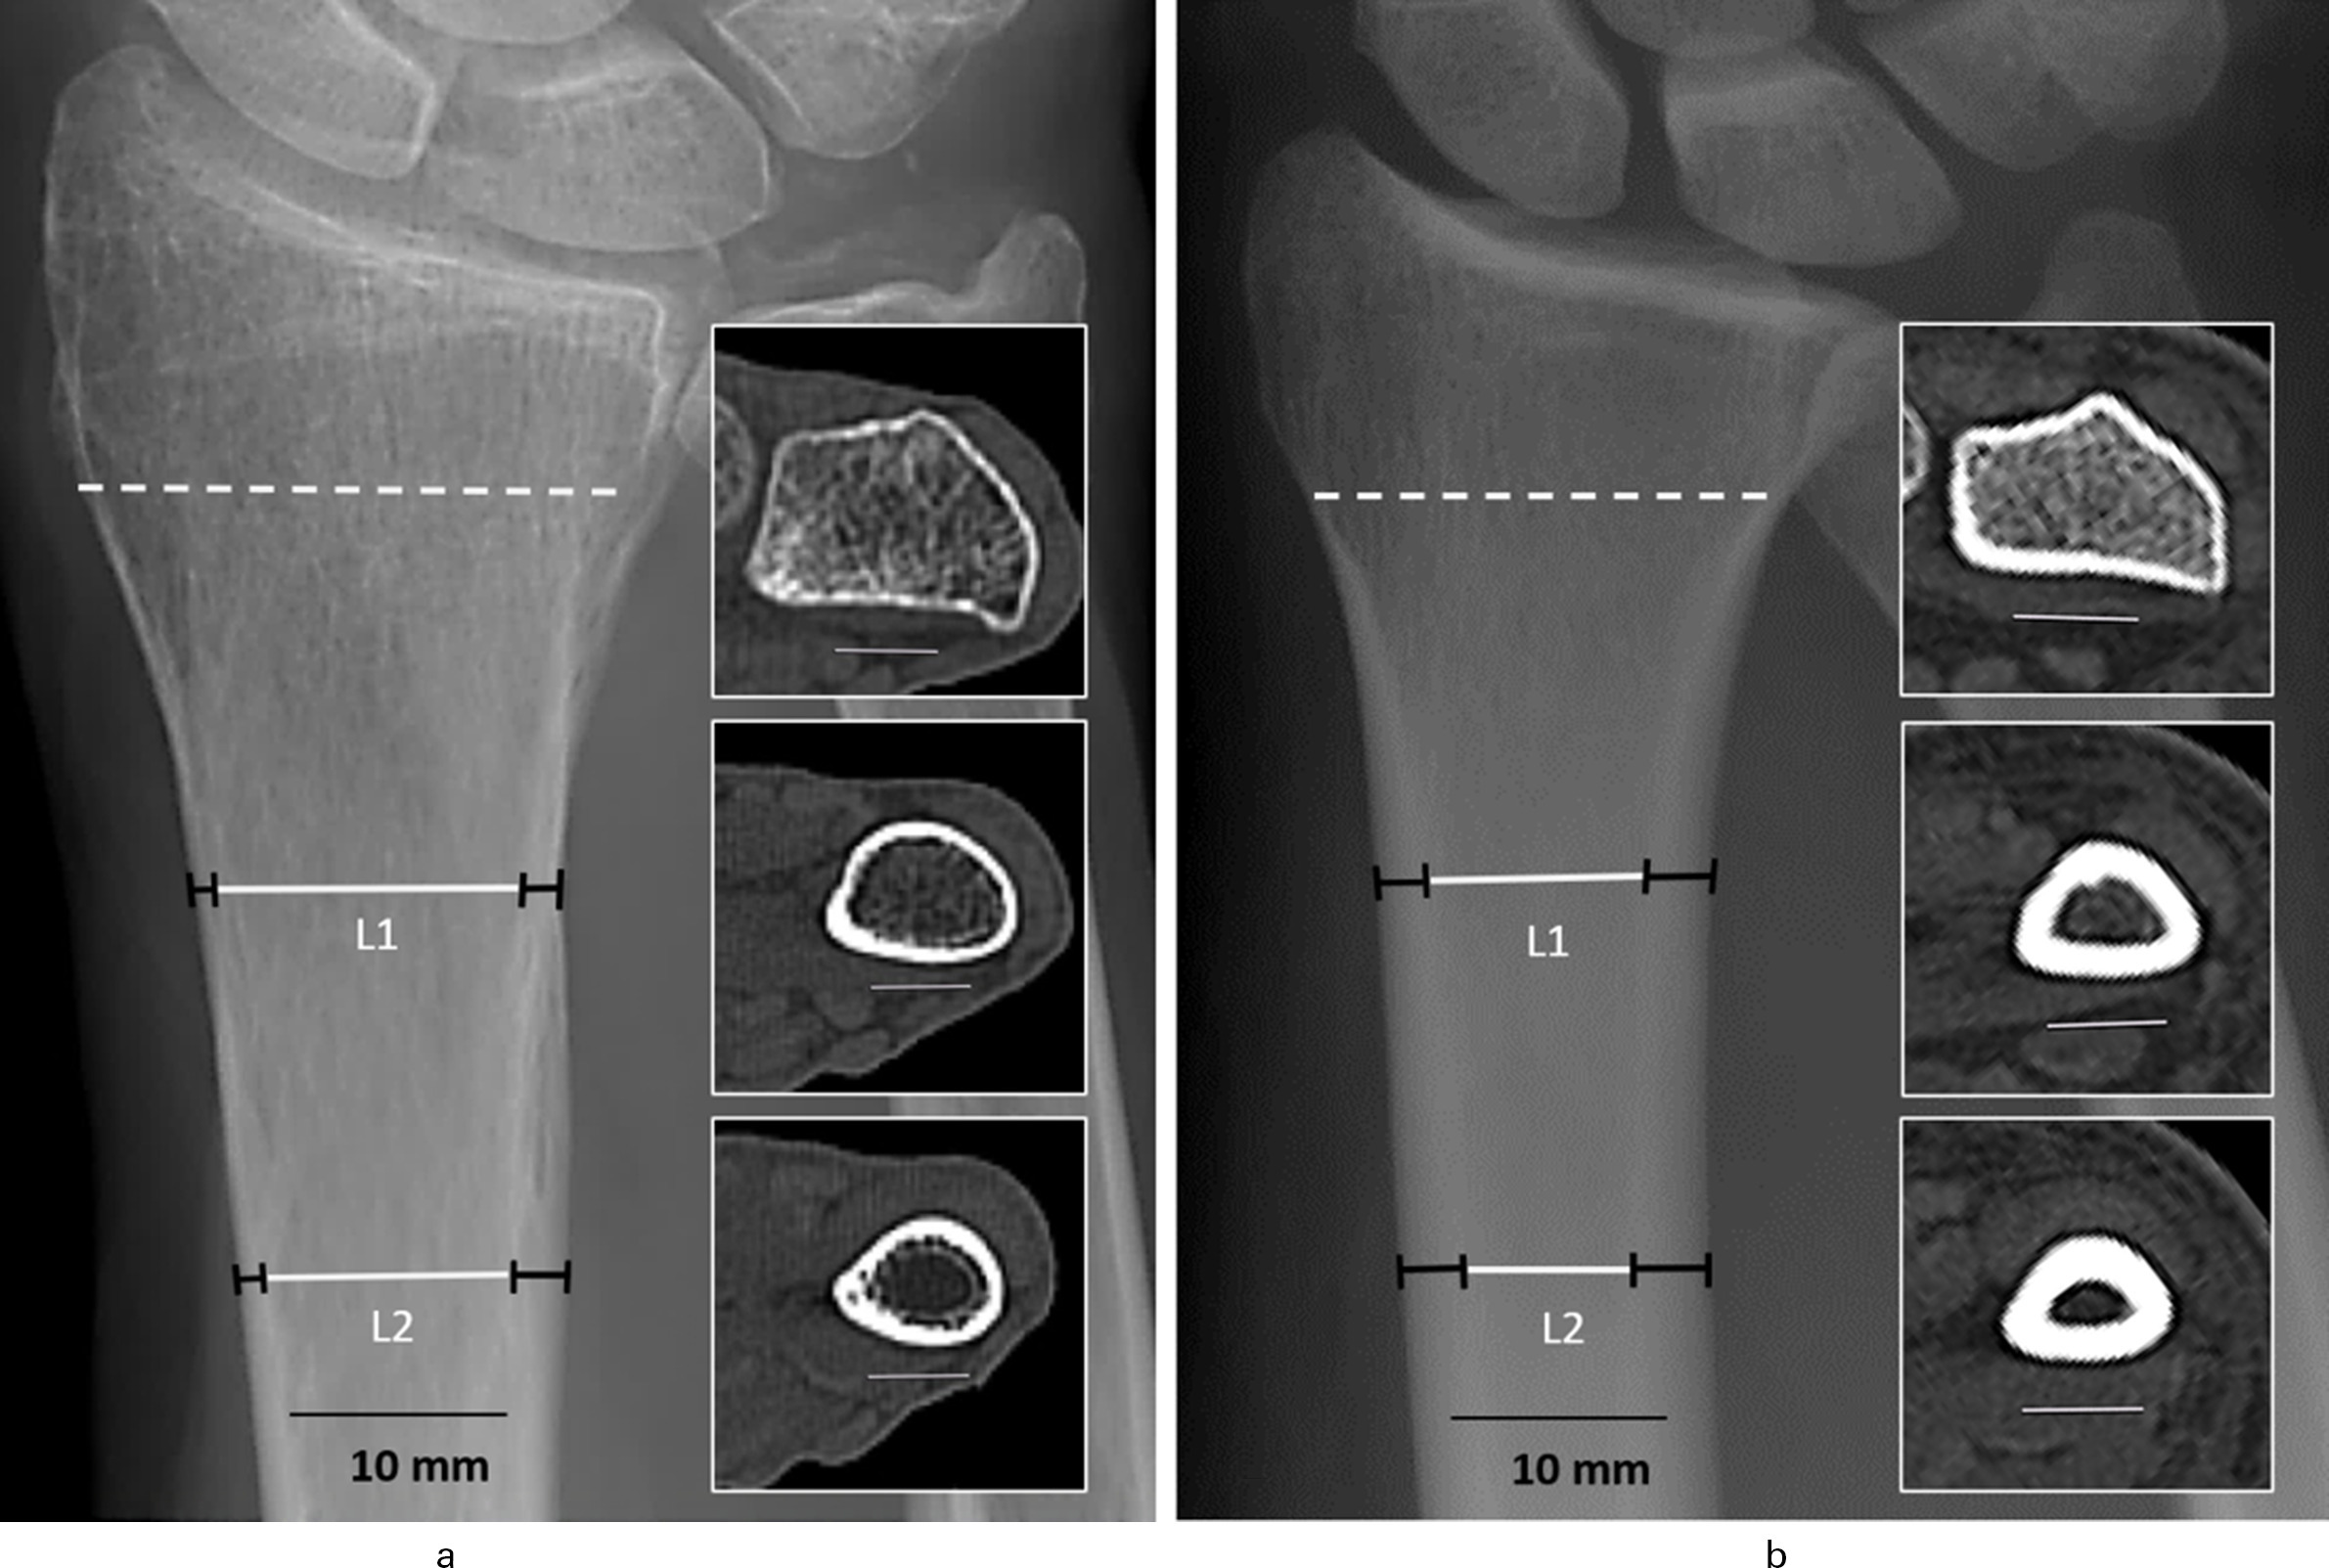 Fig. 3 
            Cortical bone thickness (CBT) in standard anteroposterior radiographs of two radius samples with a) low areal bone mineral density (aBMD) (0.37 g/cm2) (female, 89 years old) and b) high aBMD (0.67 g/cm2) (male, 32 years old). Apparent difference in the CBT with a mean average CBT (CBTavg) of 3.95 mm (a) versus 6.65 mm (b). CBT visualized in a high-resolution peripheral quantitative CT (HR-pQCT) (volumetric bone mineral density (vBMD)) section (scattered line/insert) and at the CBT levels (L1 and L2 black bars = cortical thickness) with the corresponding CT sections (inserts).
          